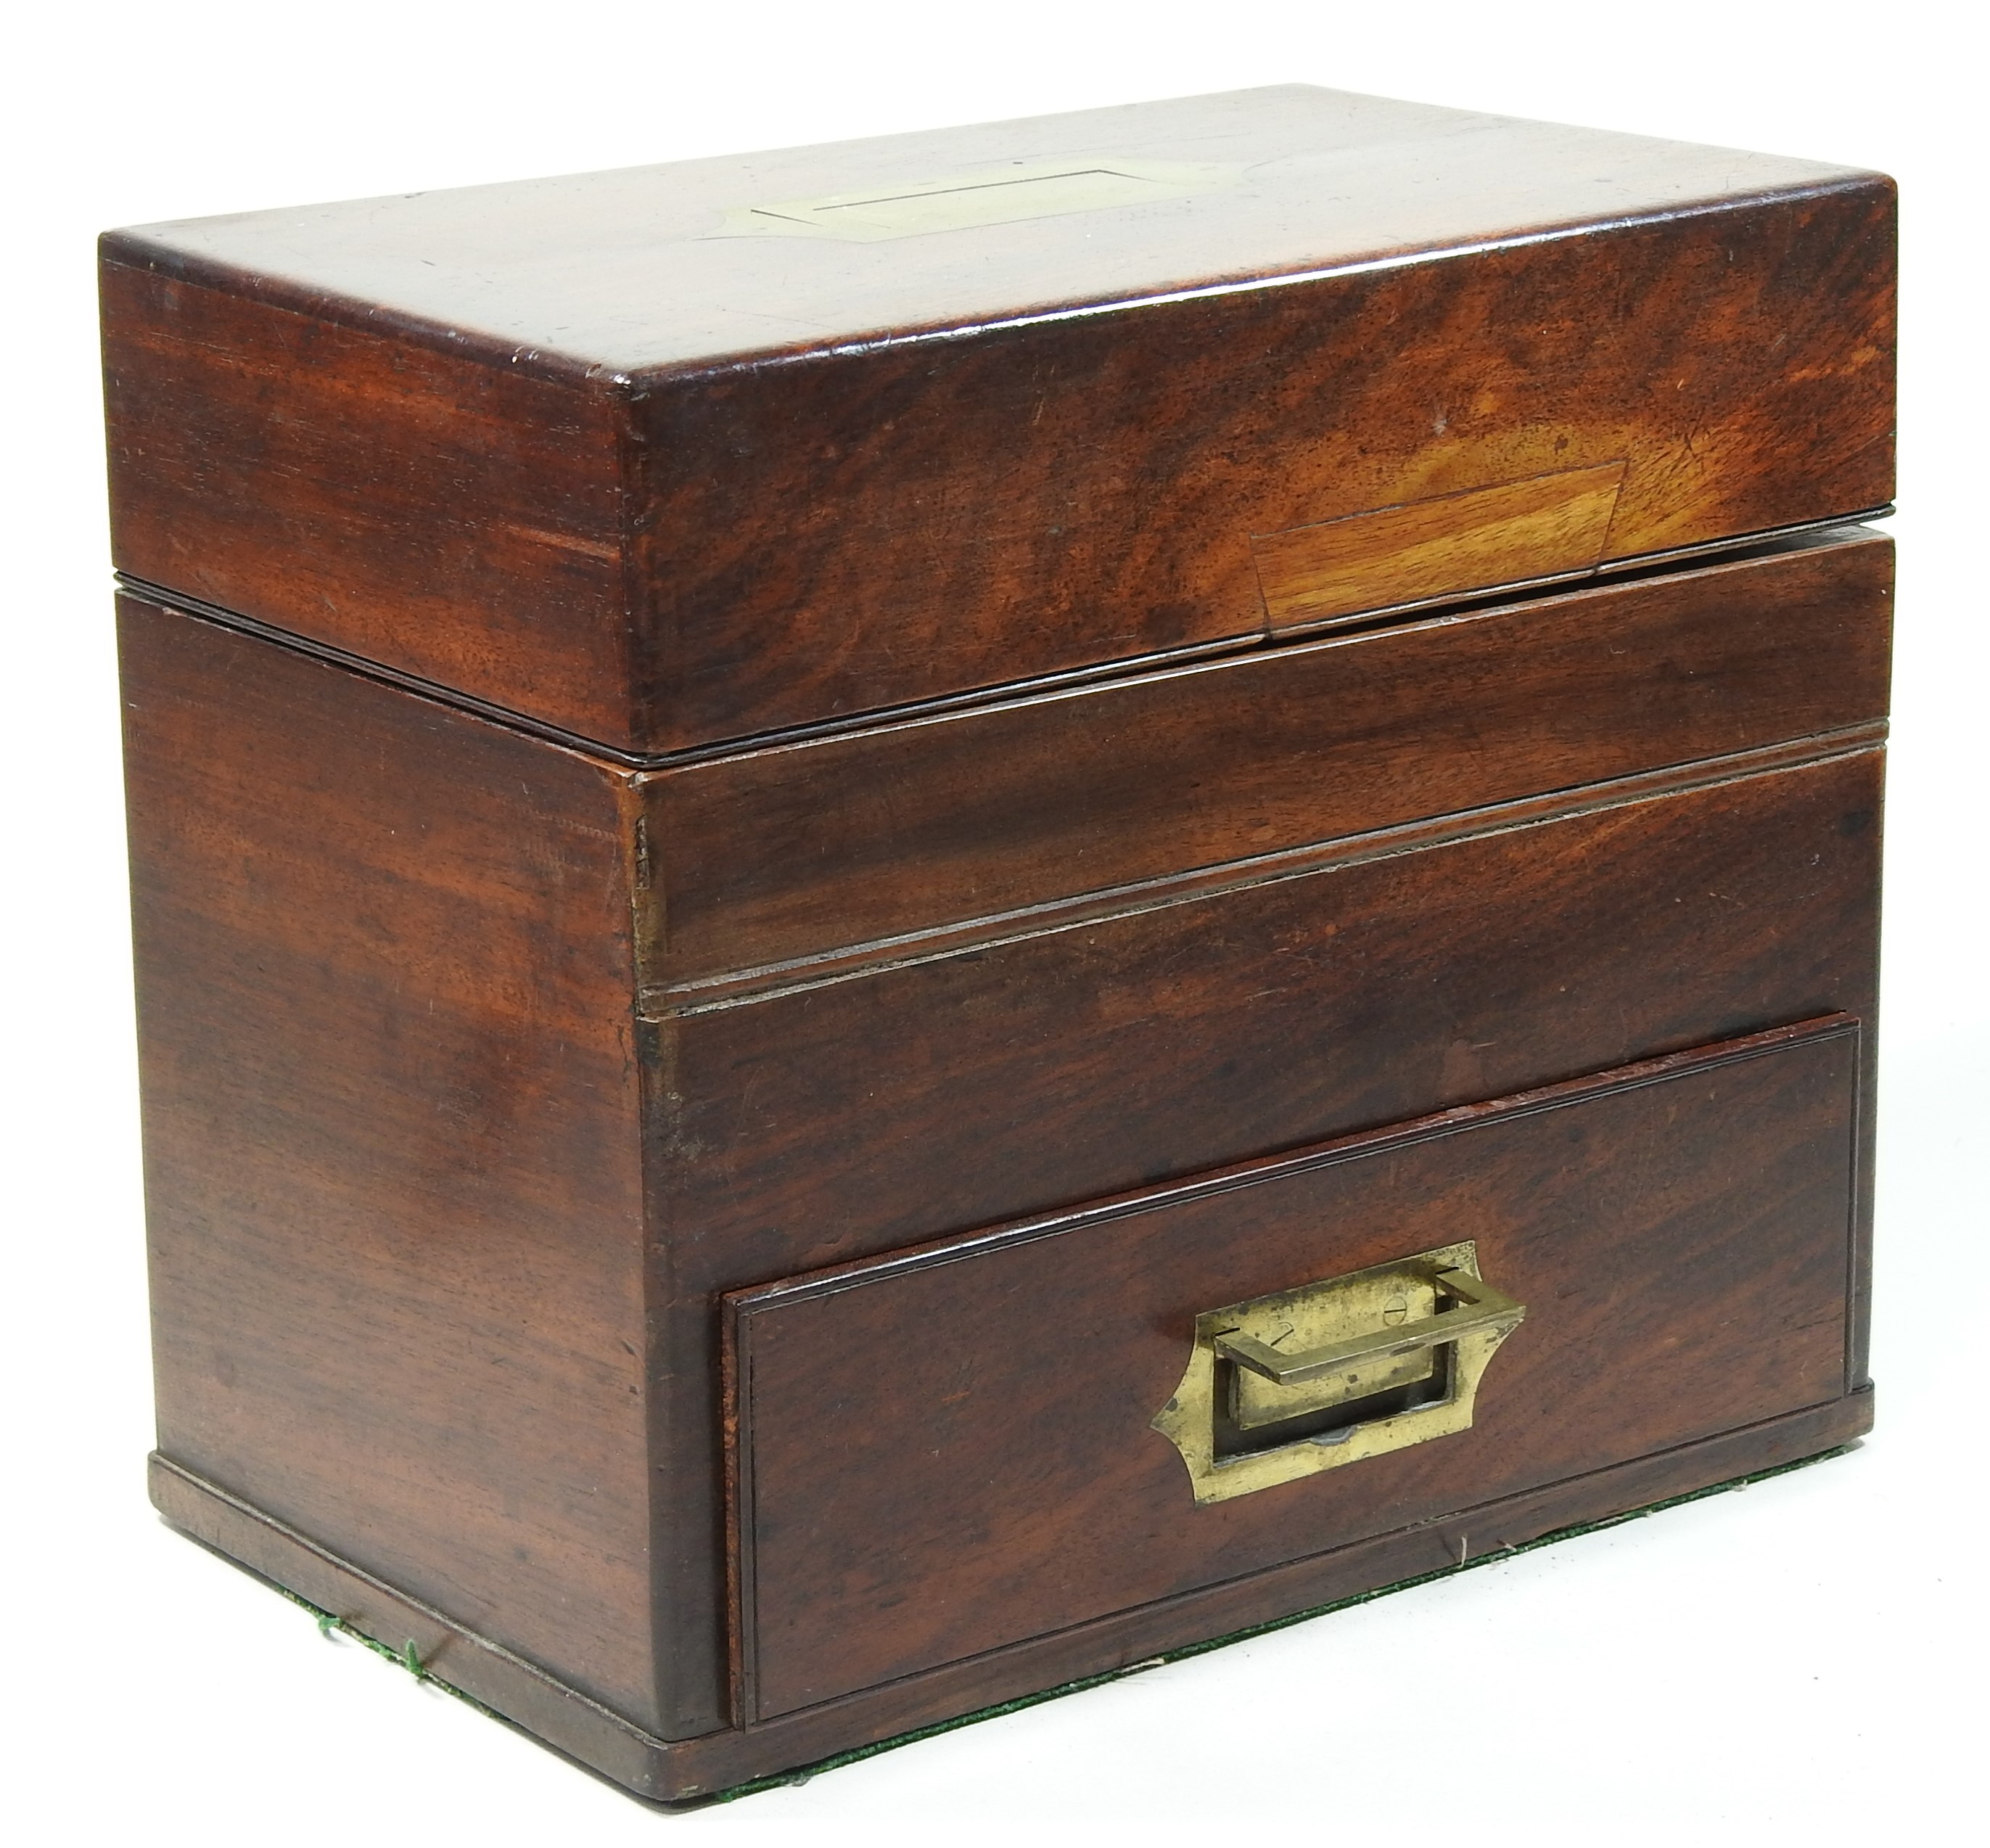 A 19th century mahogany portable apothecary box, the hinged lid revealing a fitted interior, - Image 6 of 27